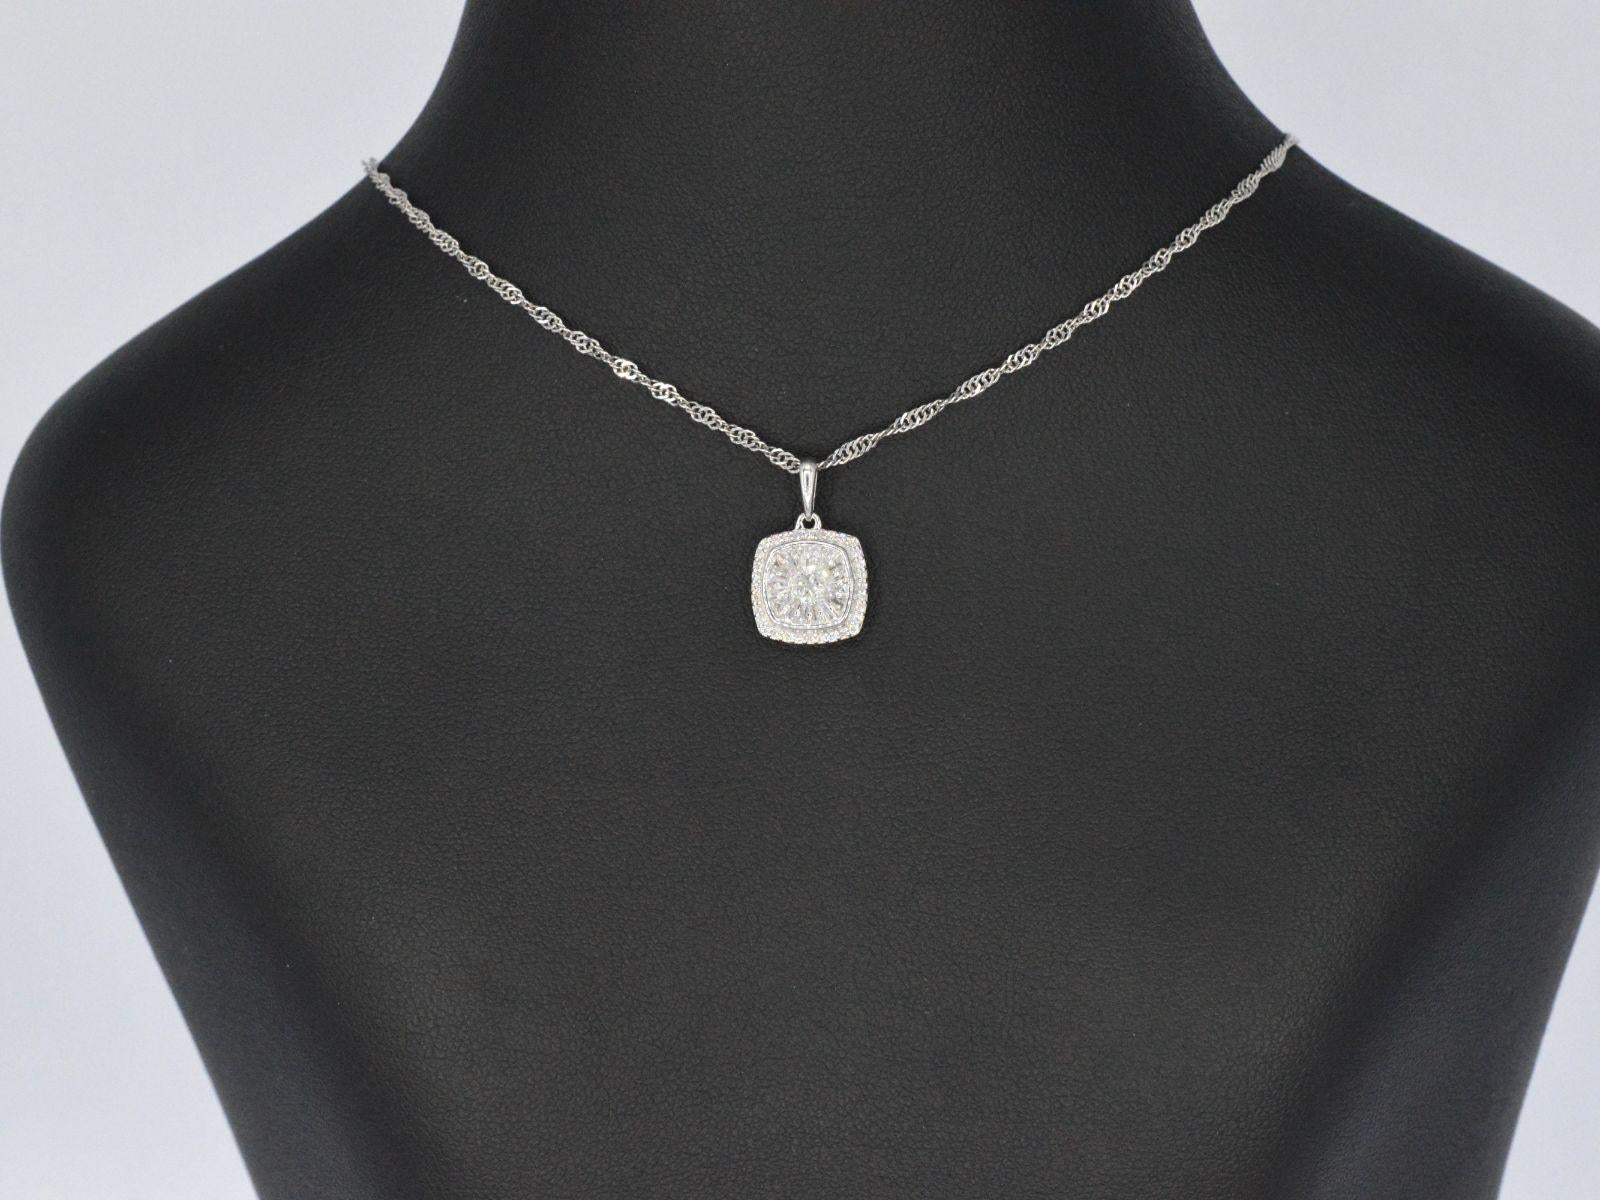 Introducing a beautiful pendant that combines the elegance of brilliant-cut and baguette-cut diamonds. This pendant contains 0.55 carats of diamonds with a color grading of F-G and a clarity range from SI to P. The diamonds are of good quality,